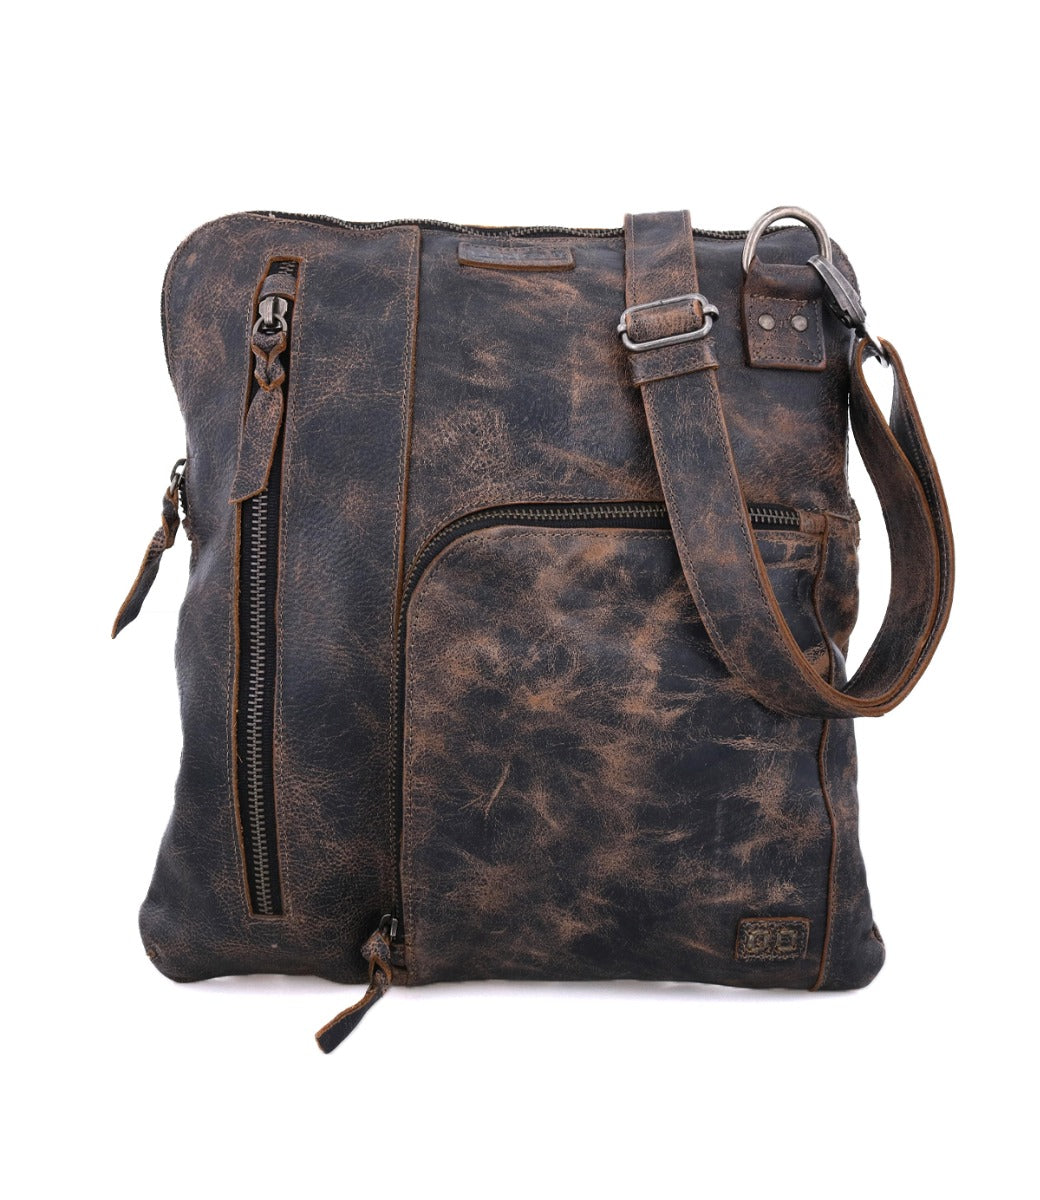 A Bed Stu Aiken distressed black leather crossbody bag with a zippered compartment.